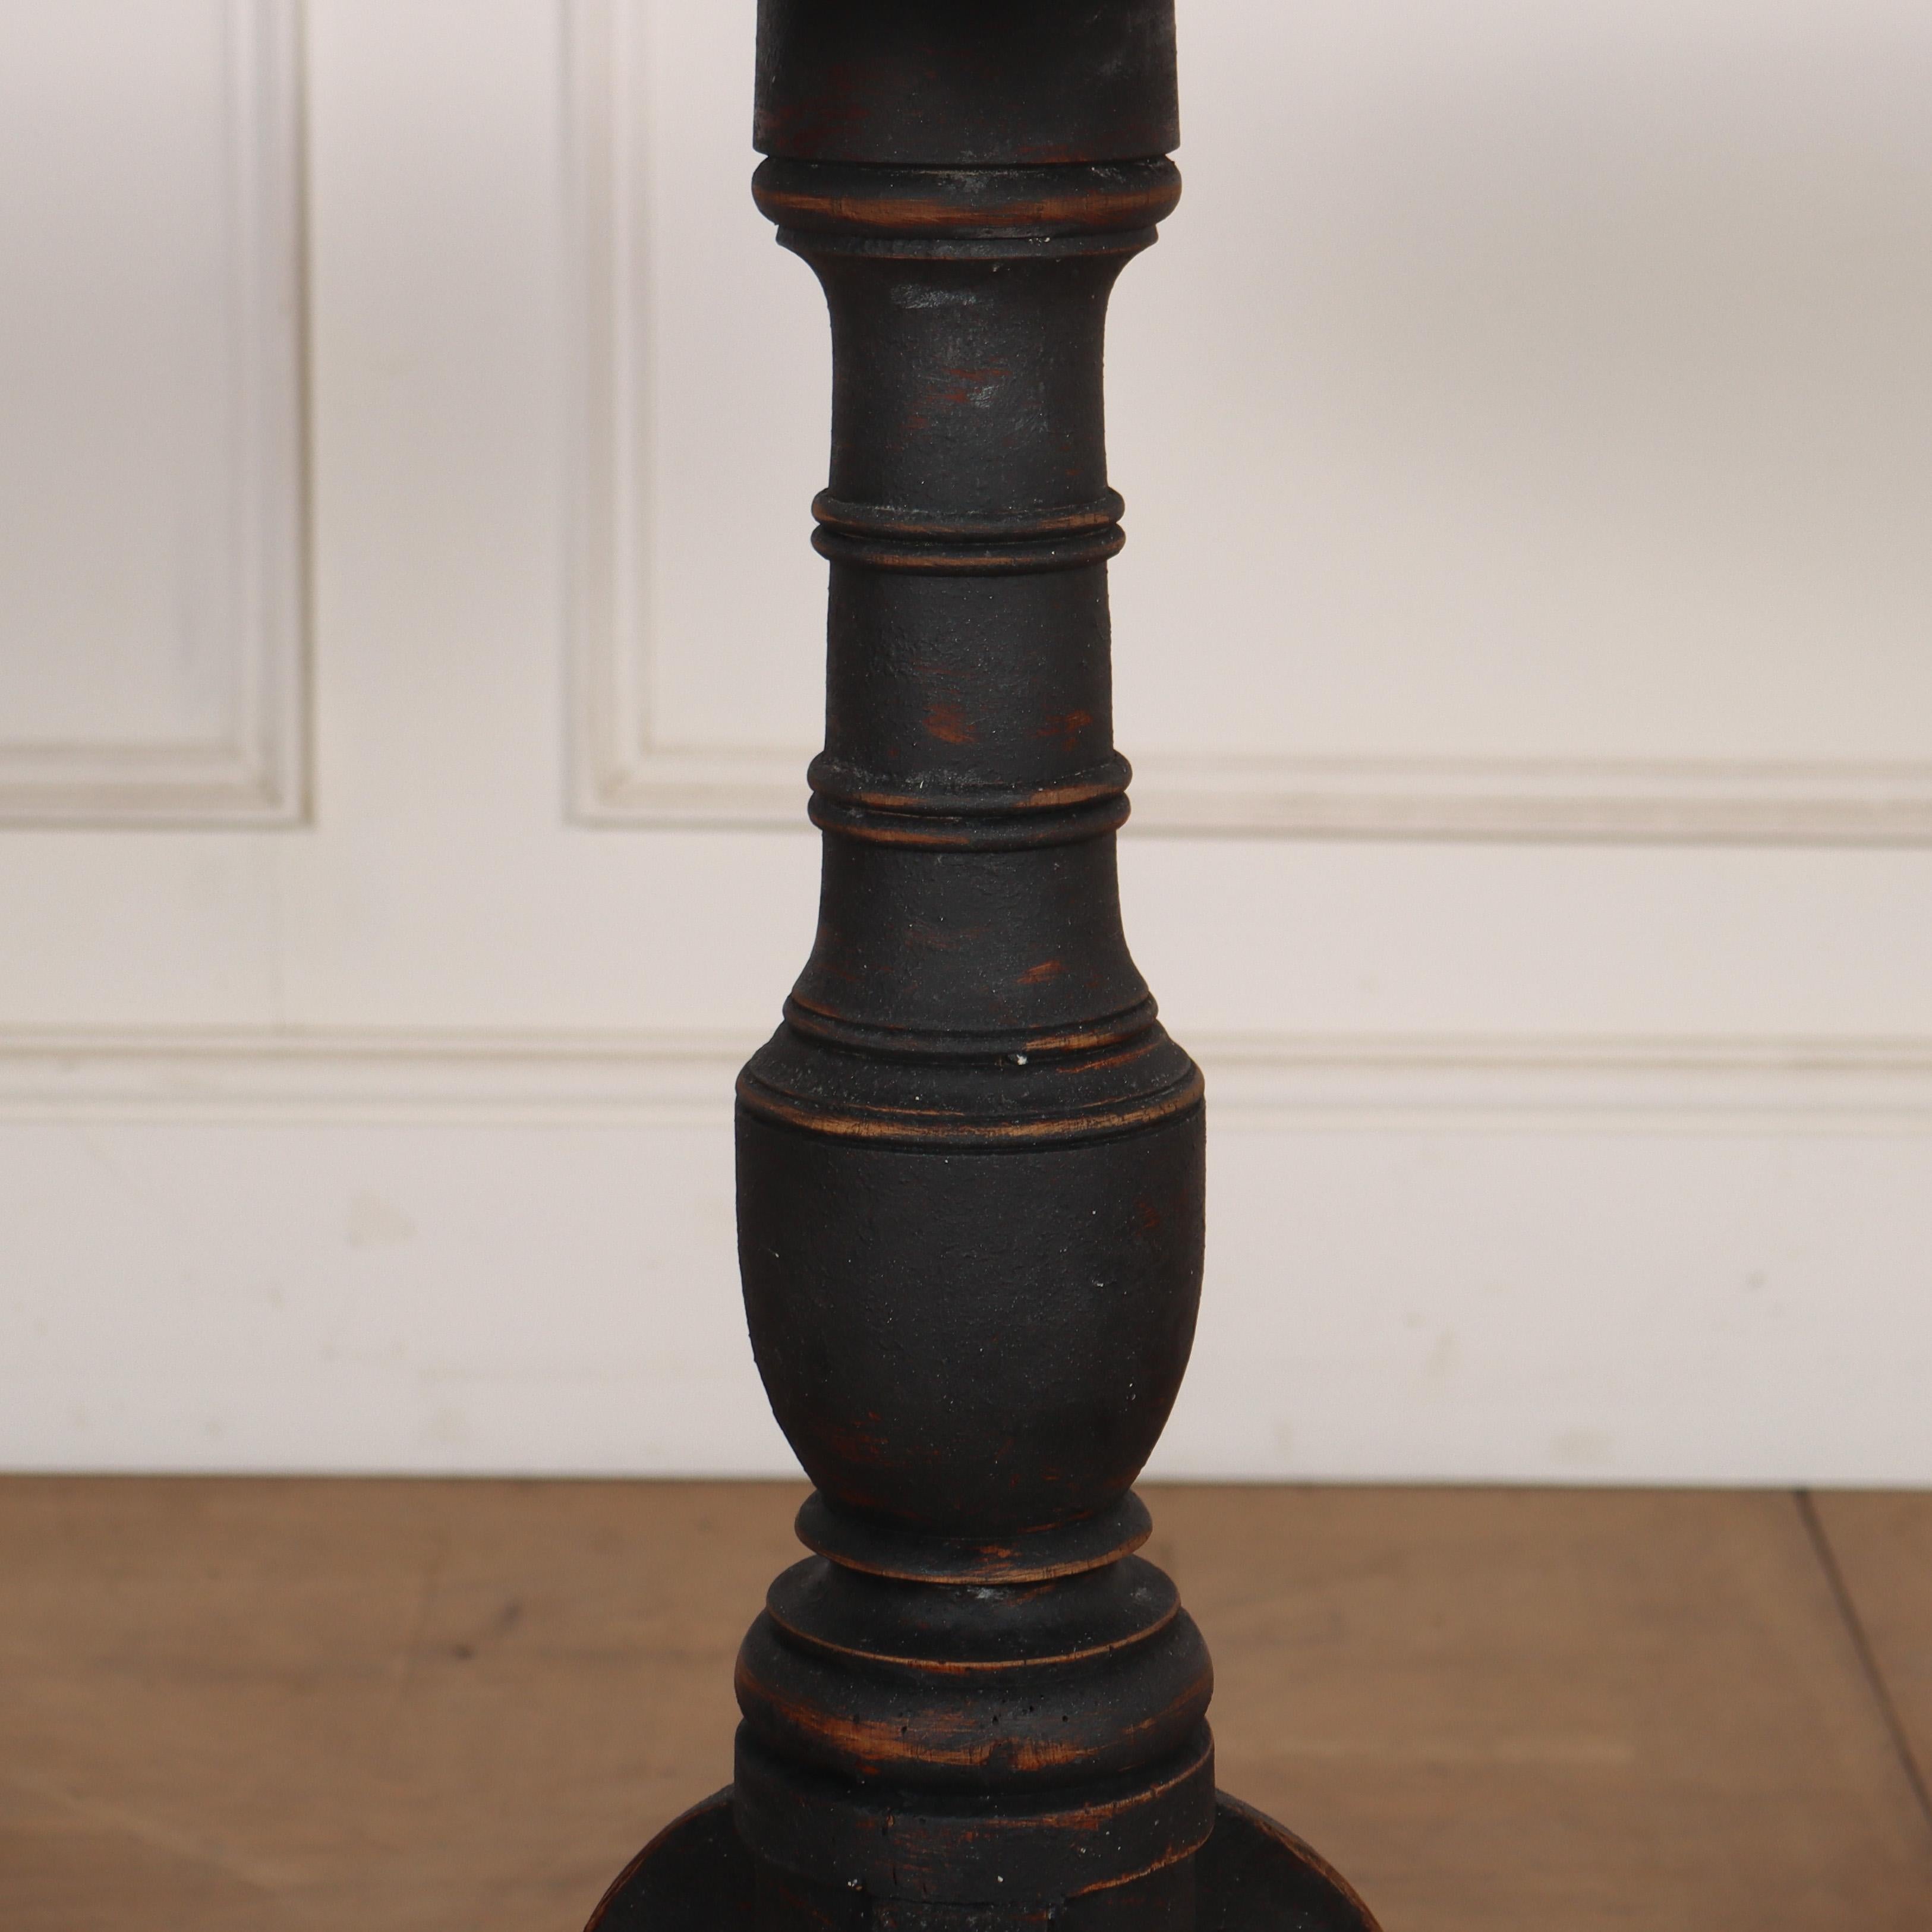 Early 19th C painted oak Swedish lamp / side table with a faux marble top. 1830.

Reference: 8035

Dimensions
28.5 inches (72 cms) High
28.5 inches (72 cms) Diameter